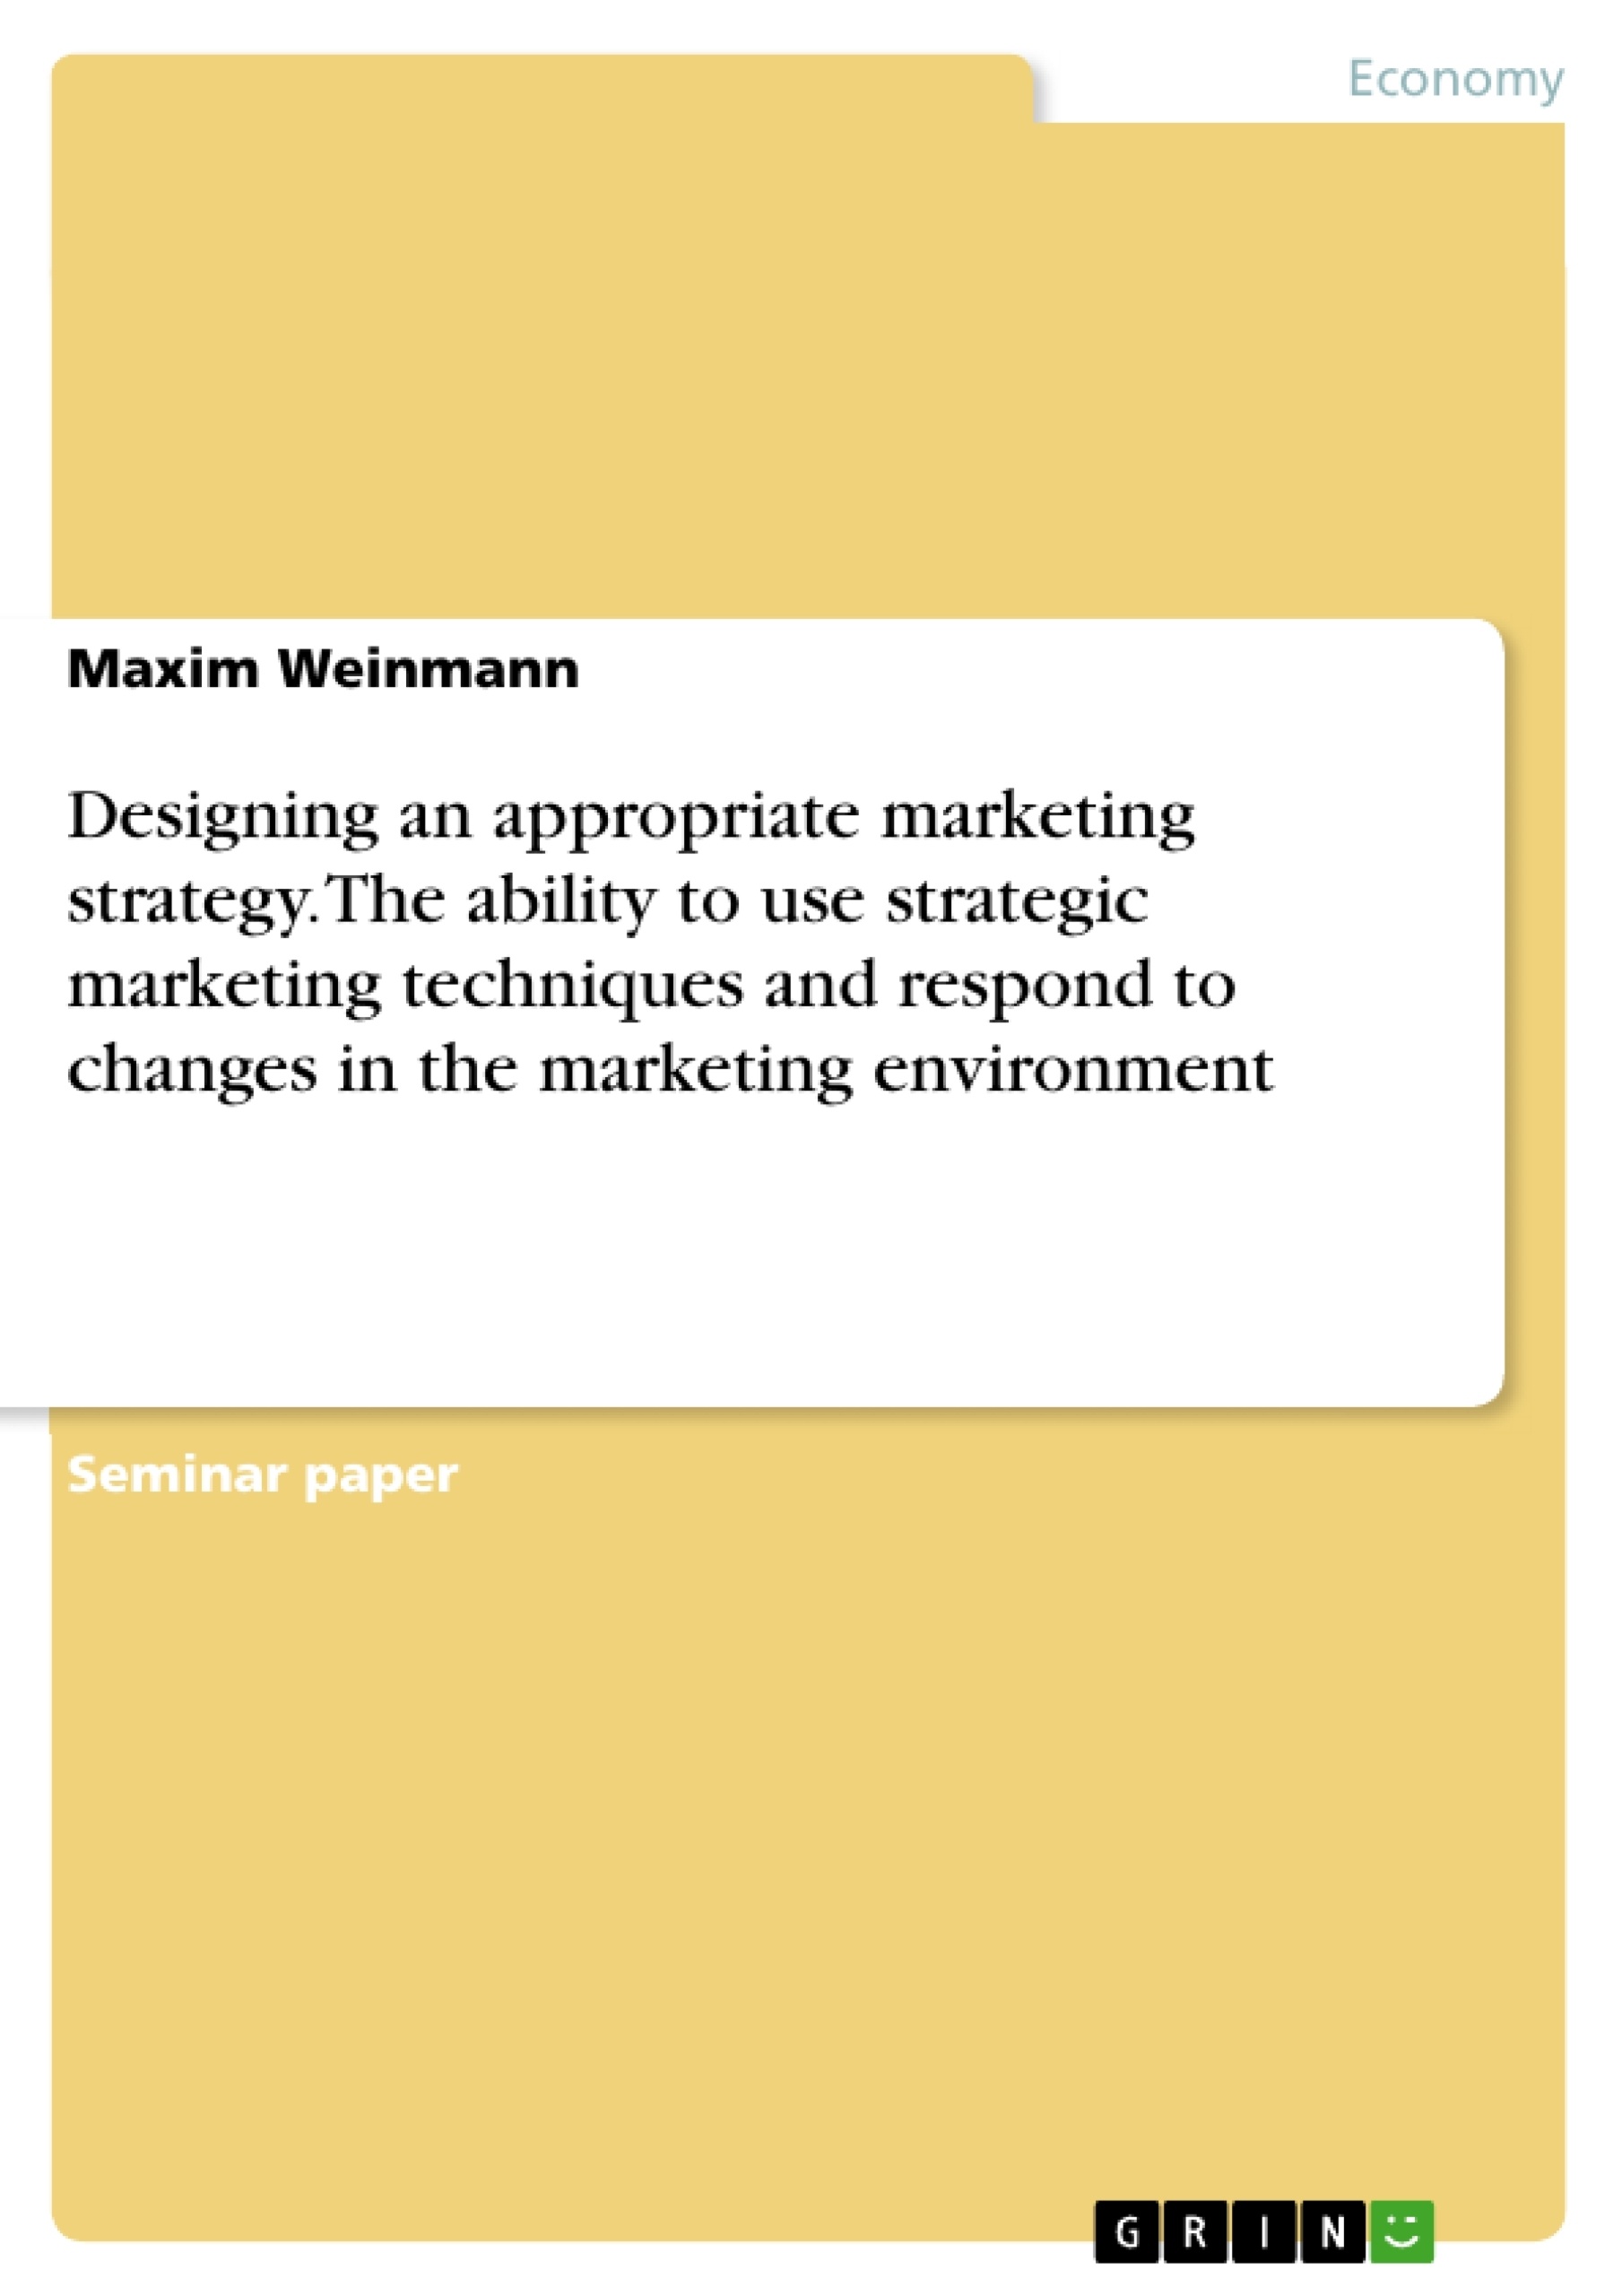 Titel: Designing an appropriate marketing strategy. The ability to use strategic marketing techniques and respond to changes in the marketing environment